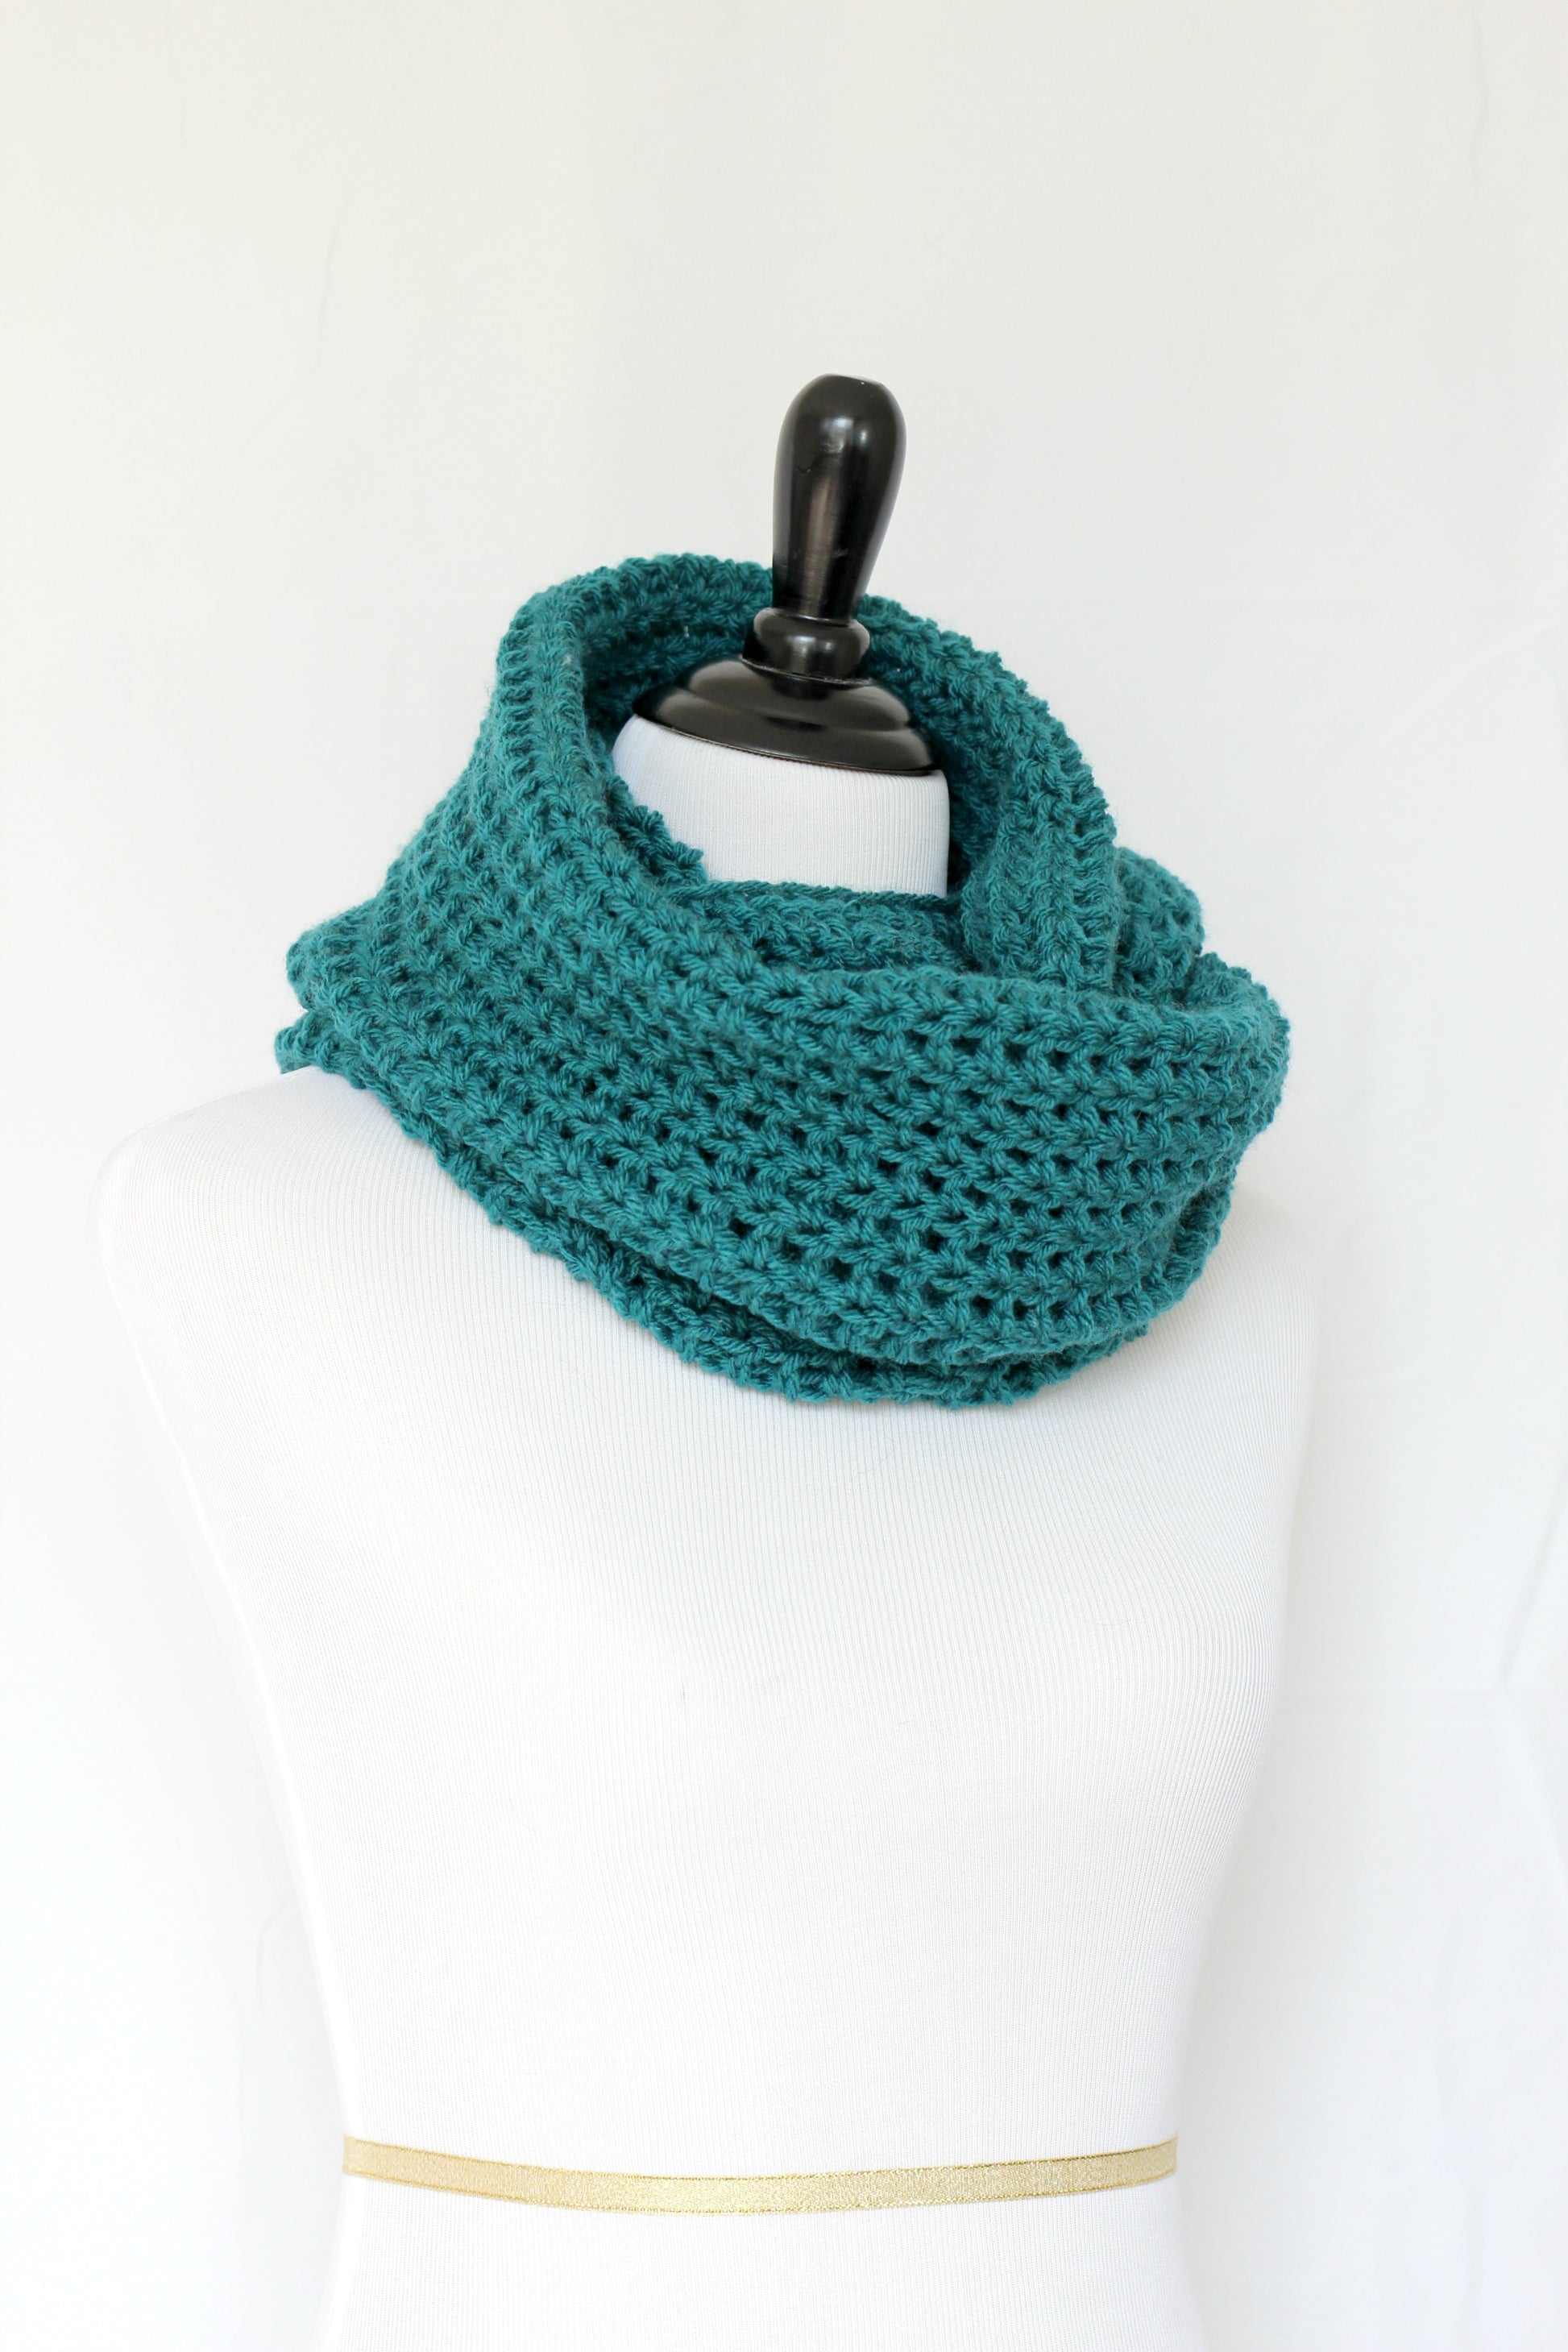 Crochet cowl in teal color, chunky infinity scarf